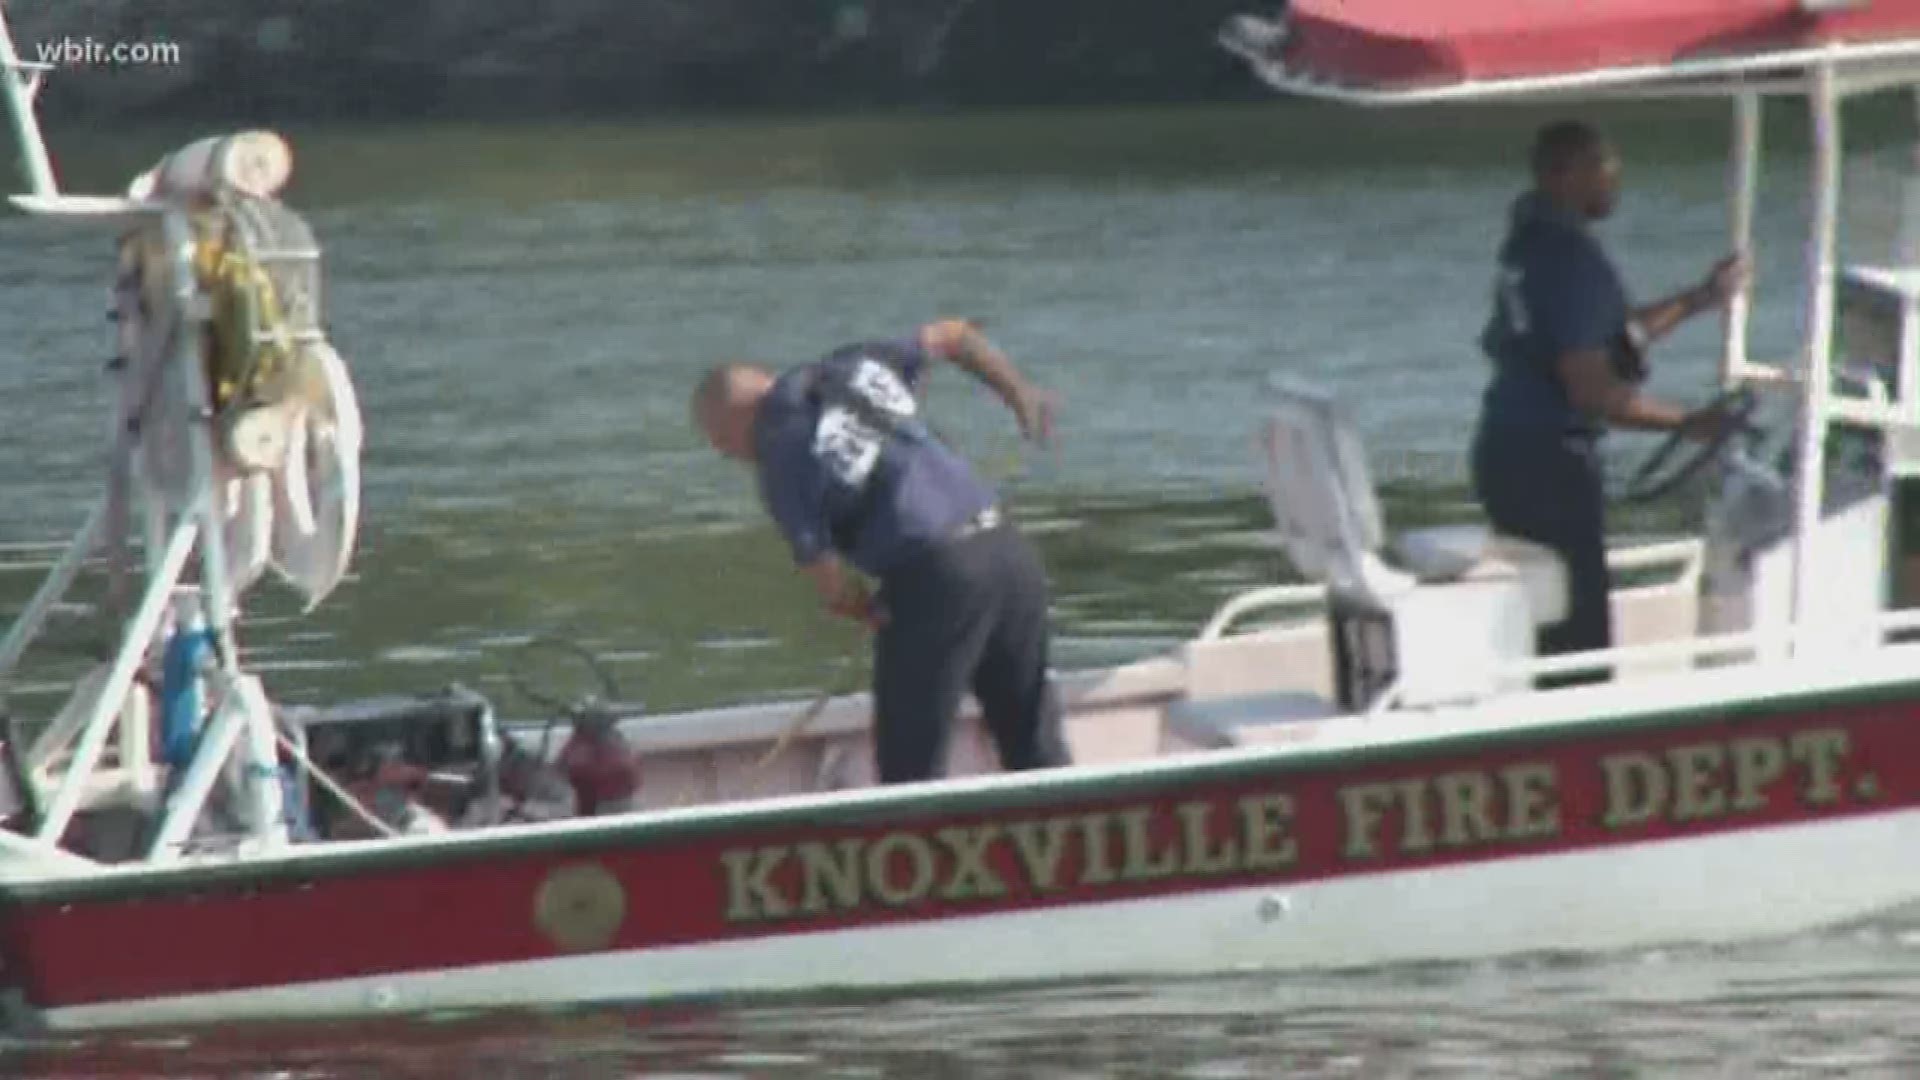 Knoxville Police Department investigators have identified the body recovered from the Tennessee River by Knoxville Fire Department personnel on Friday night.